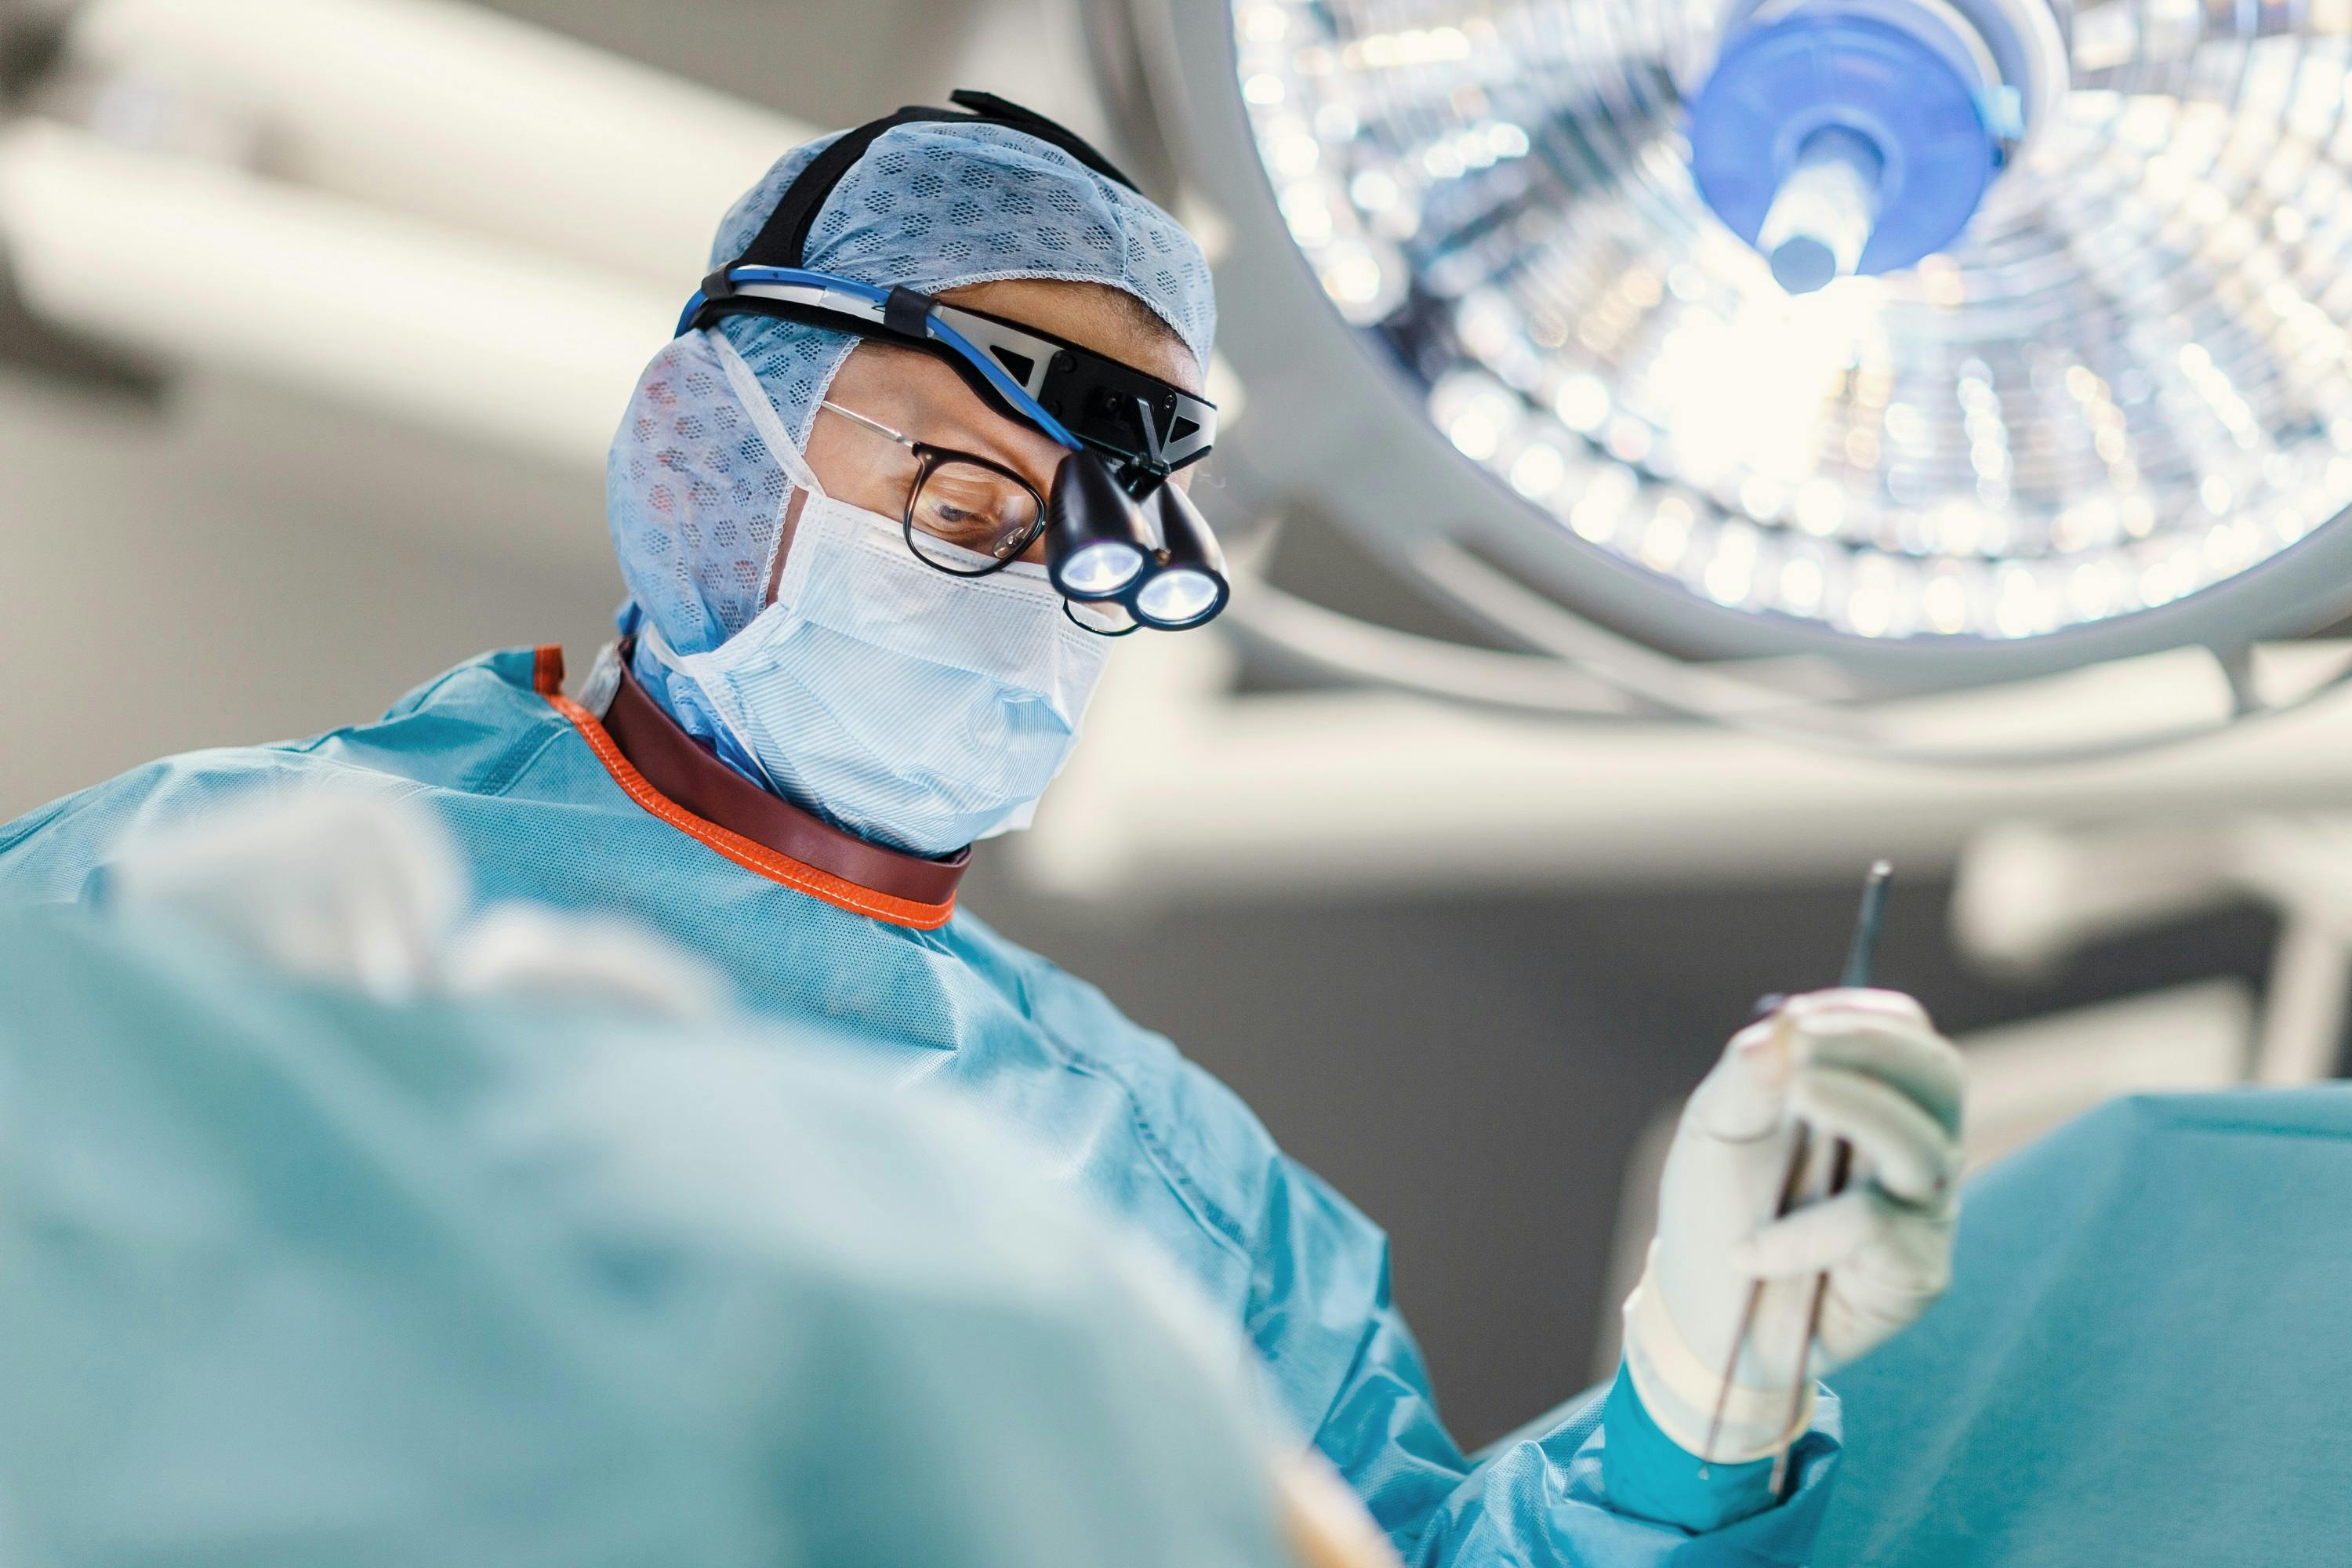 Surgeon in surgical clothing and with magnifying glasses at work in the operating theatre.